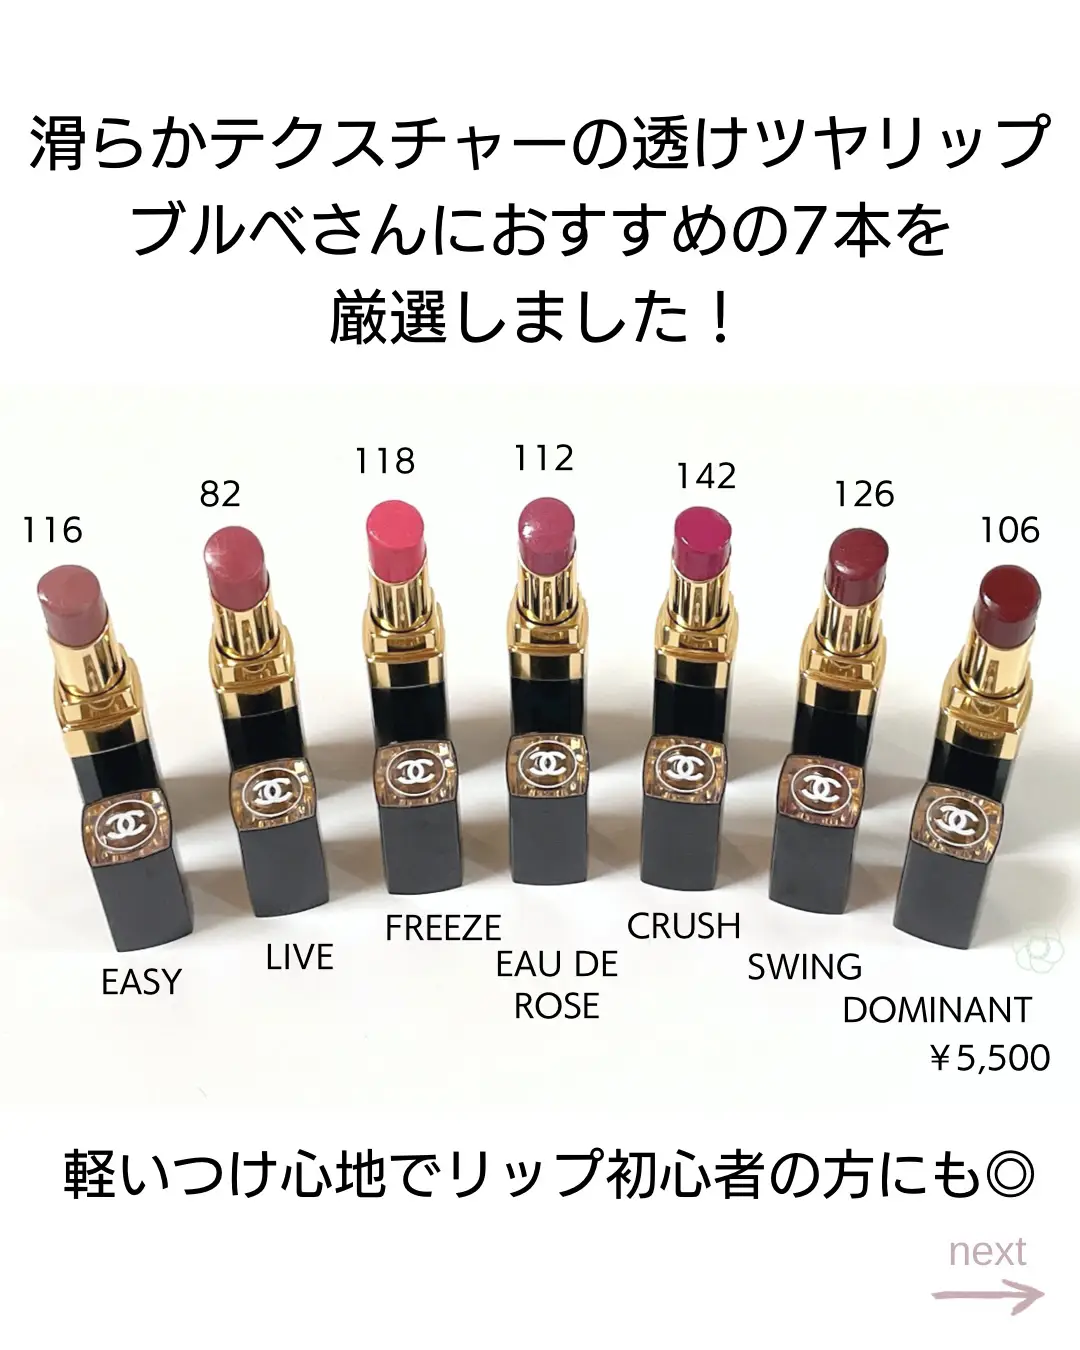 CHANEL ROUGE COCO FLASH 7, Gallery posted by ［柏］kurumi イメコン